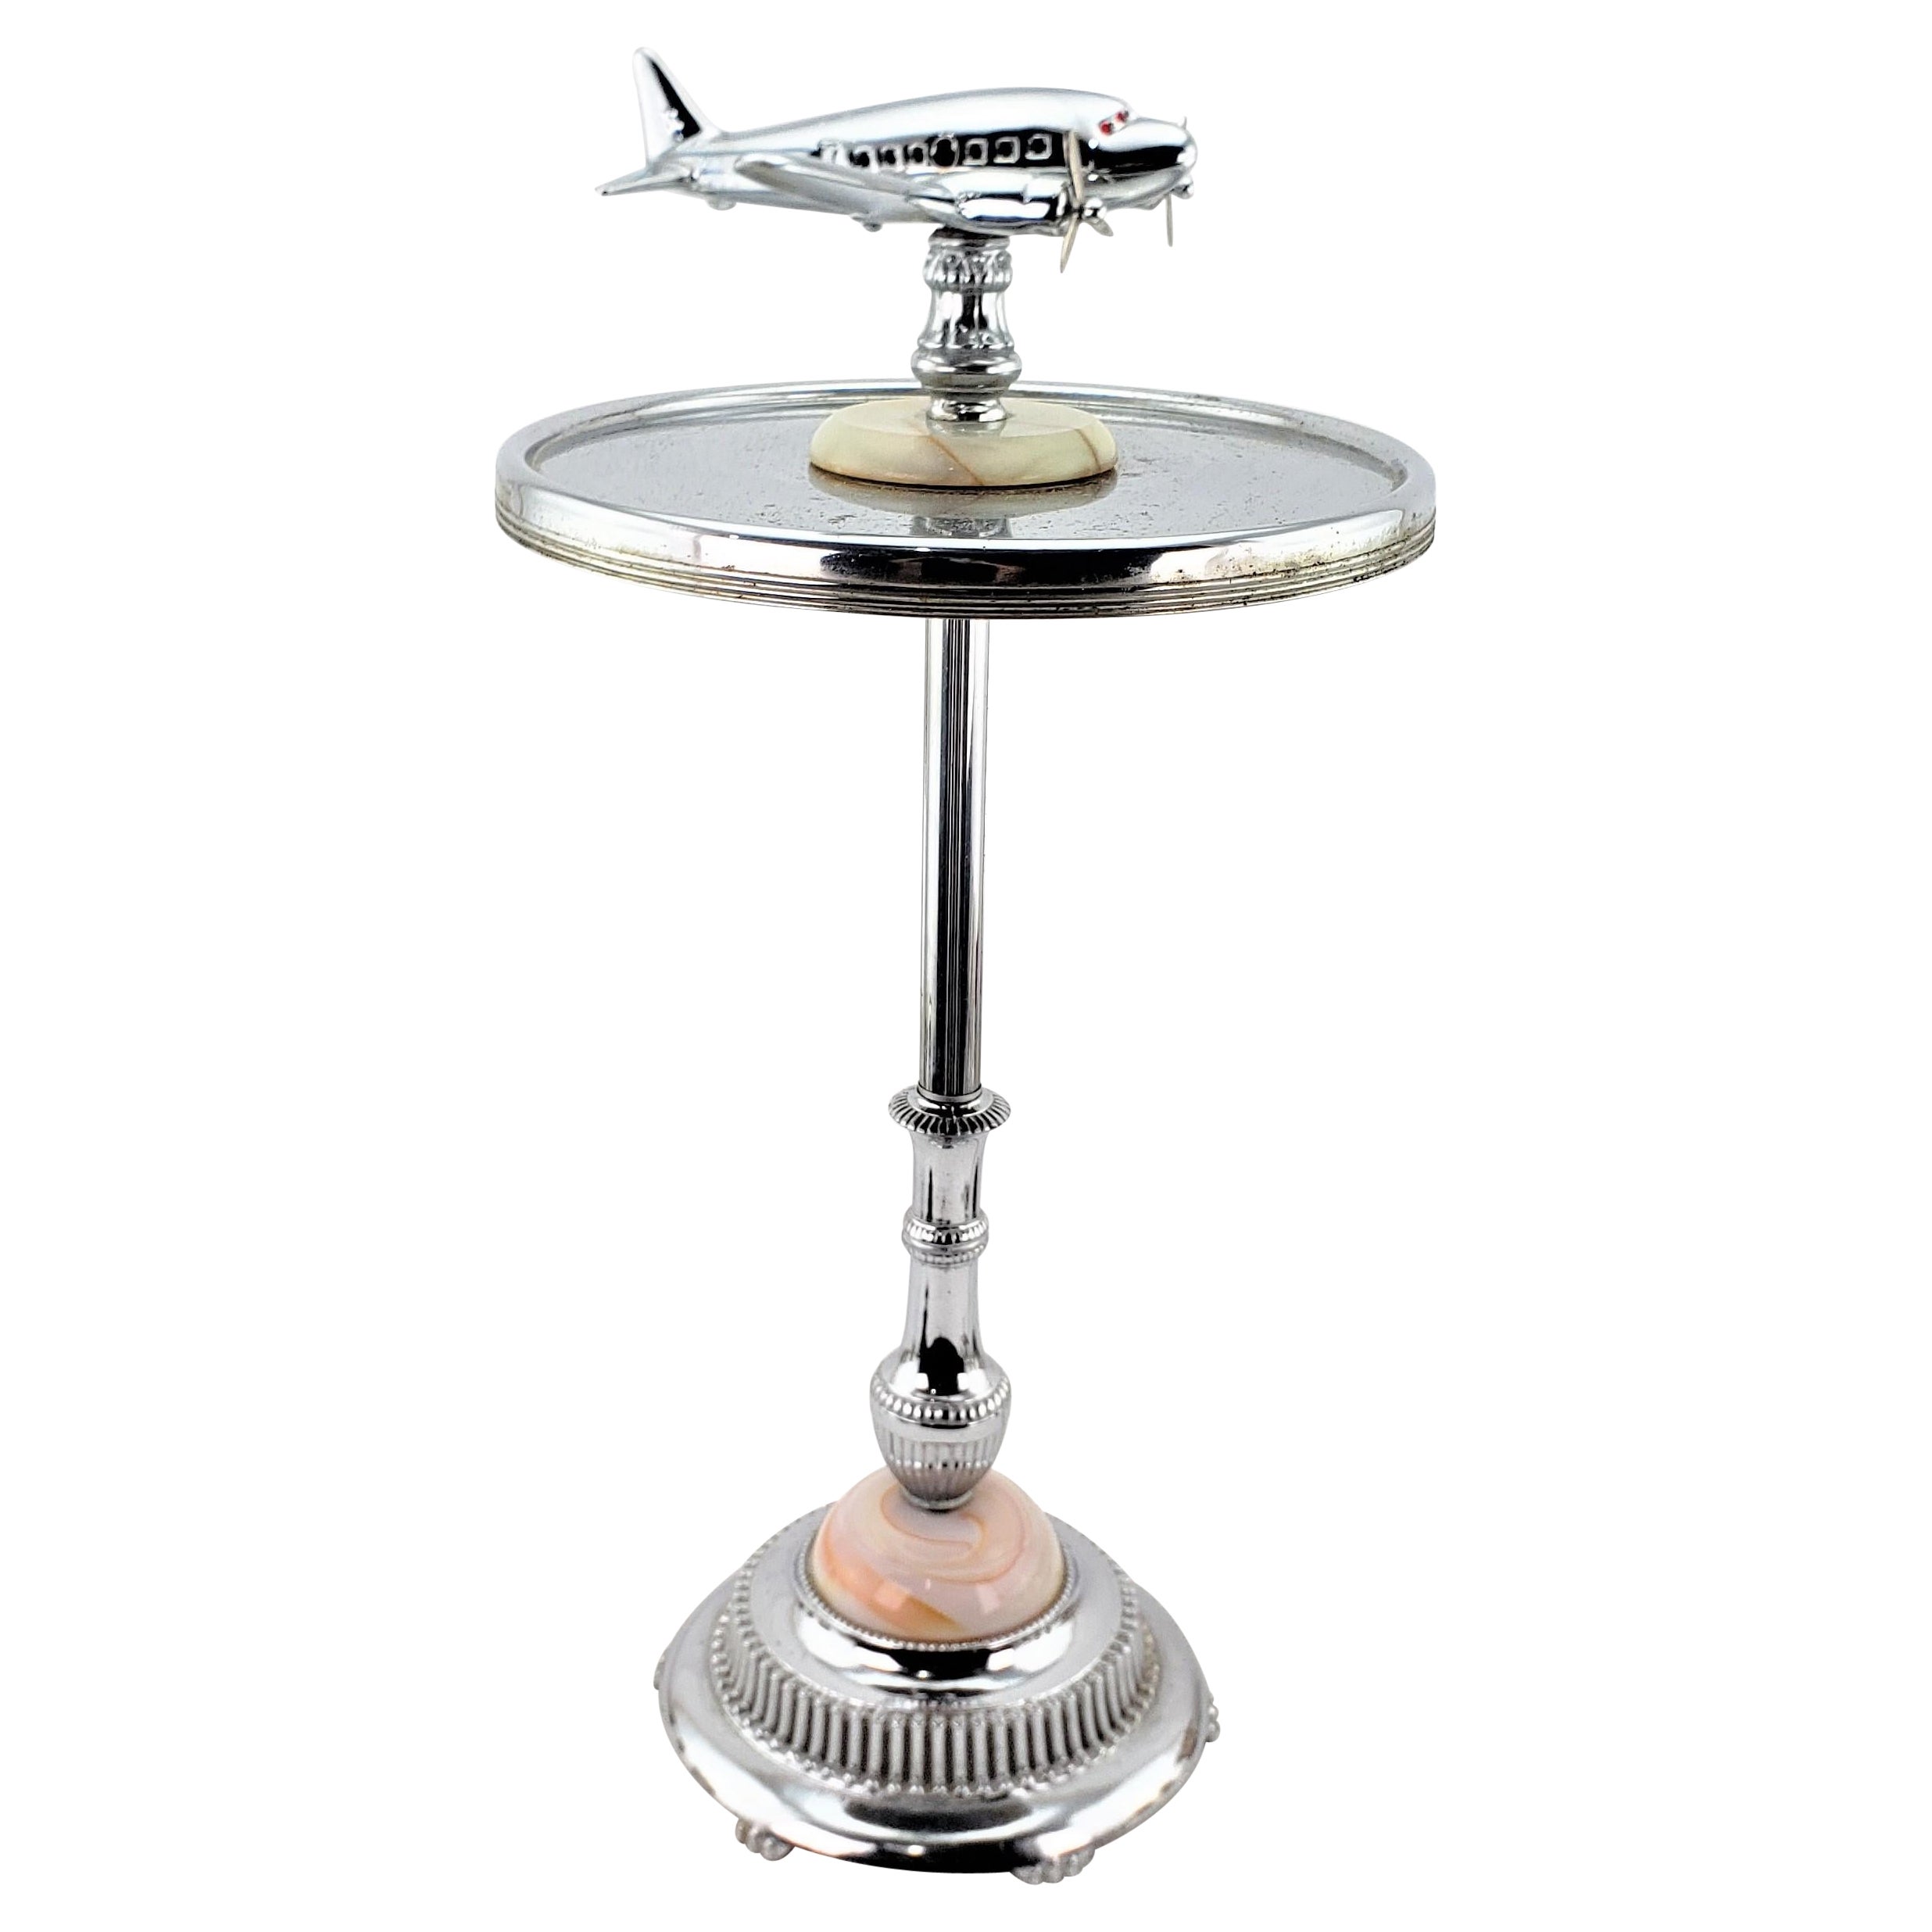 Art Deco Styled Chrome Lighted Airplane Smoker's Ashtray Stand or Accent Table